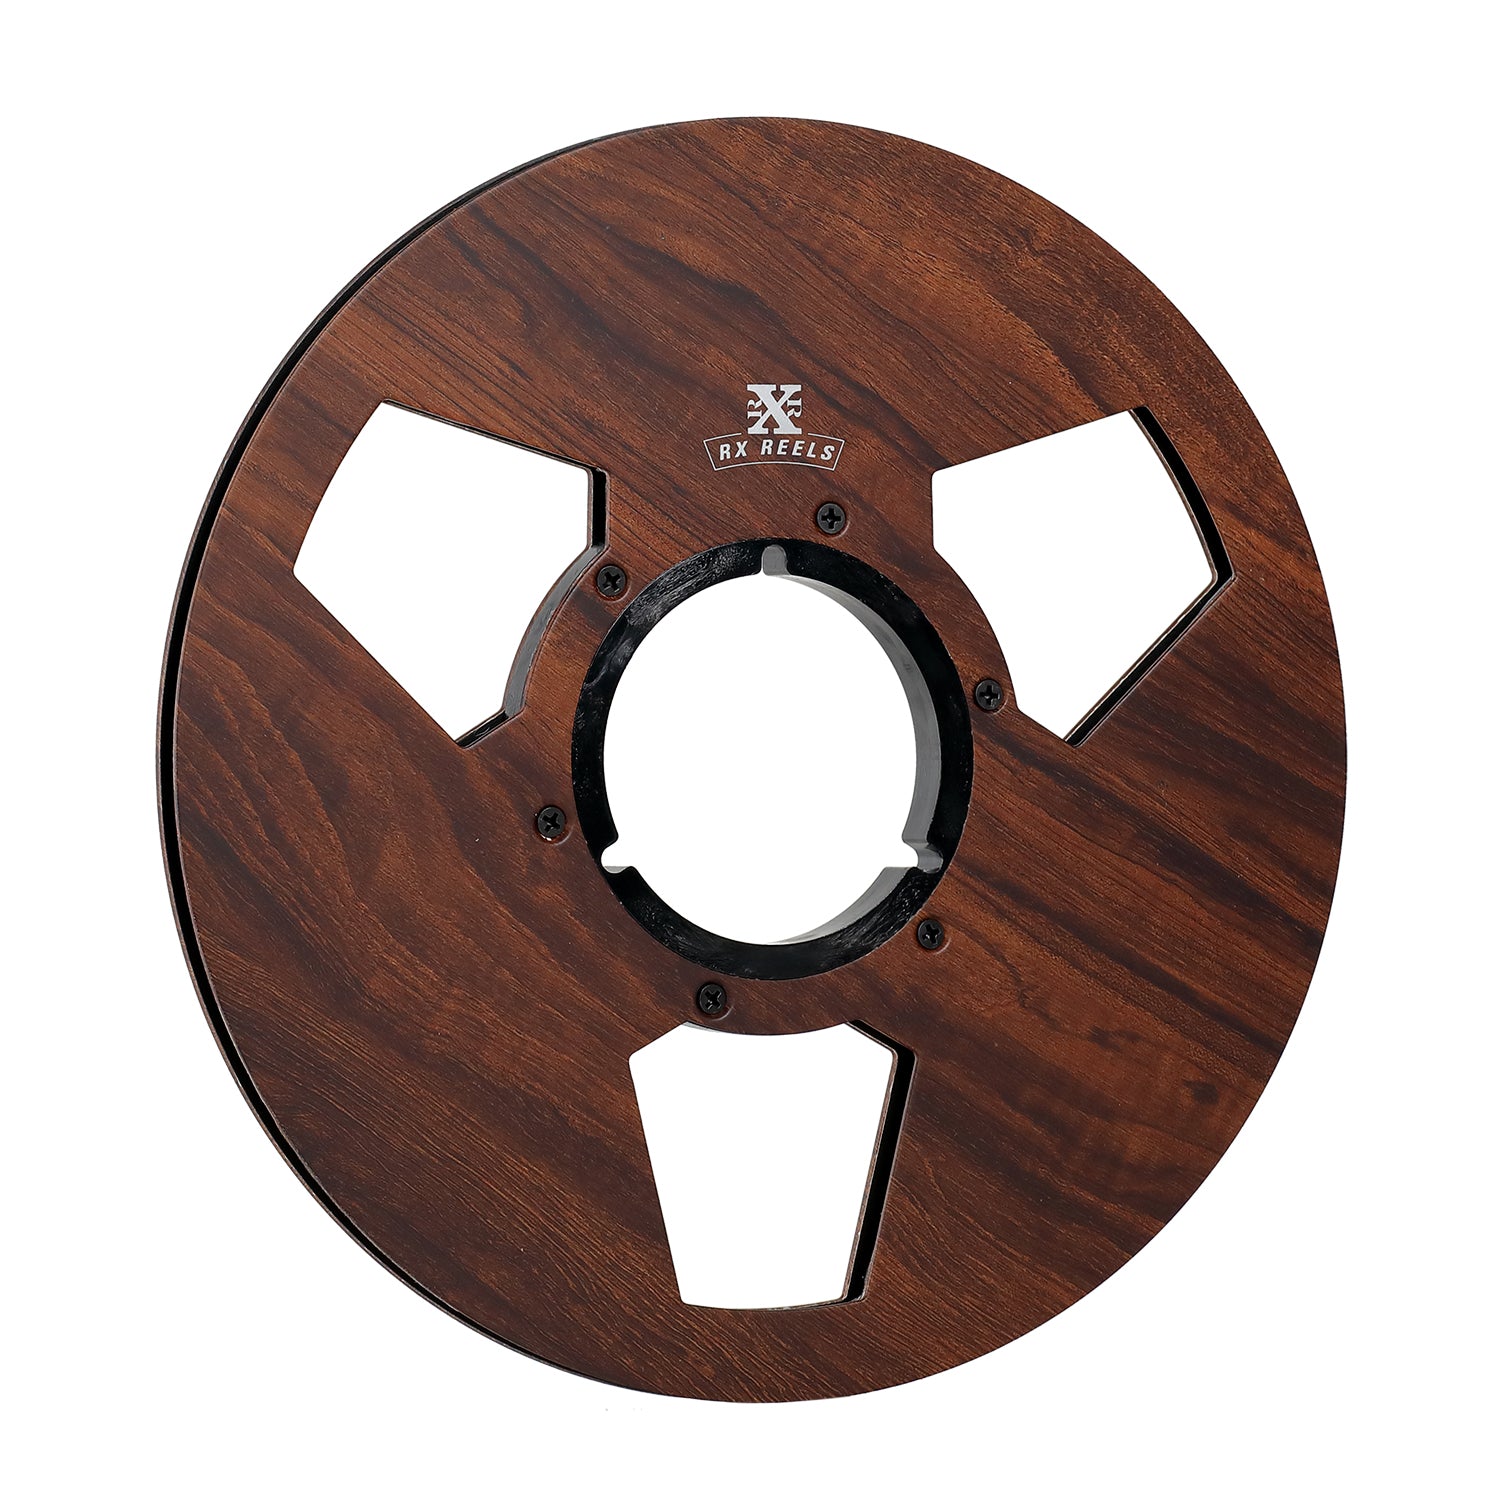 RX Reels carbon fibre tape reels will upgrade your R2R player and